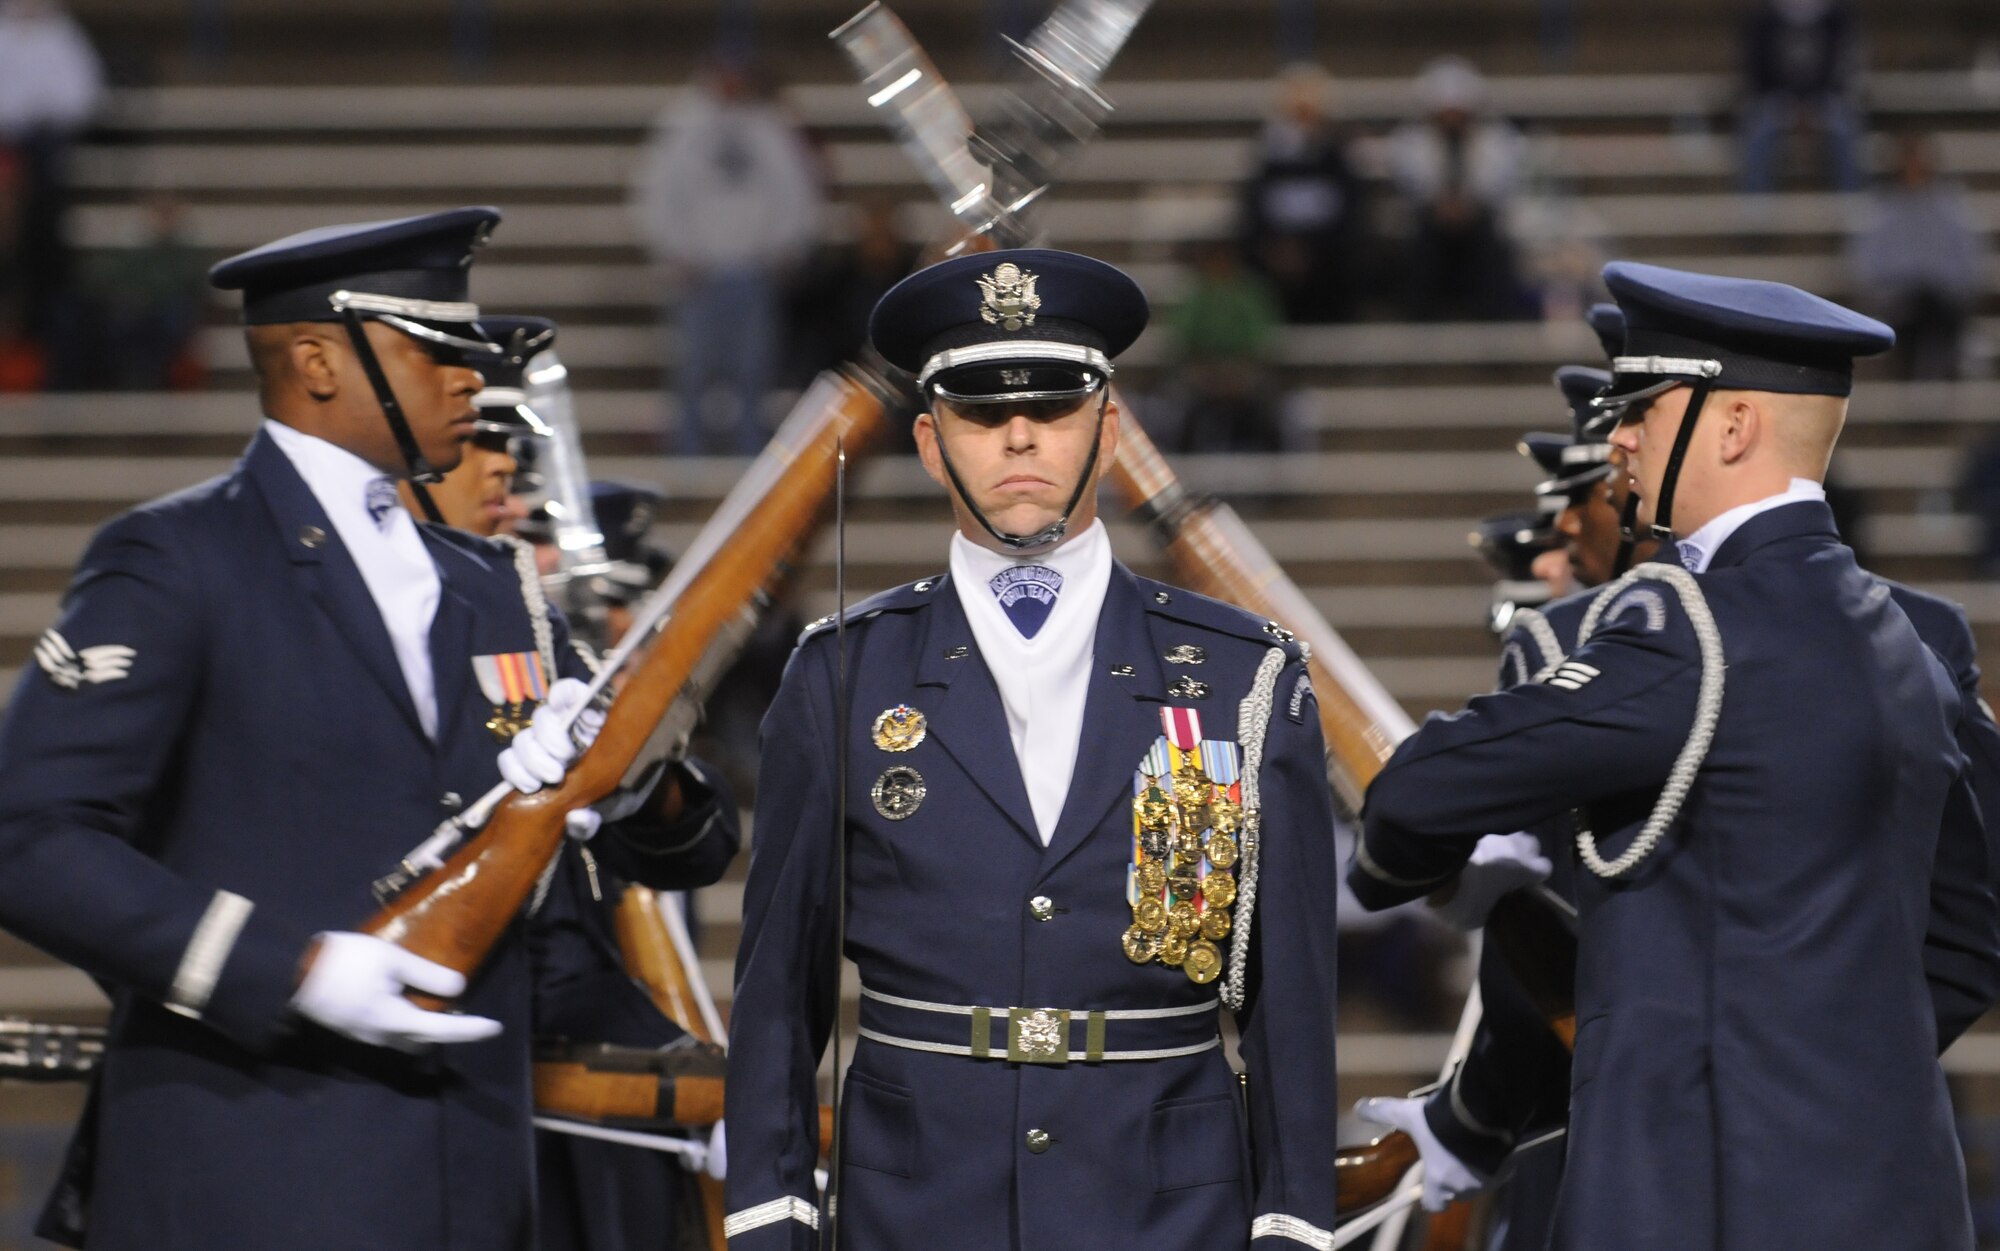 The United States Air Force Honor Guard Drill Team performs at halftime at an Angelo State University football game Oct. 31 in San Angelo, Texas.  The Drill Team tours worldwide representing all Airmen while showcasing Air Force precision and professionalism and personifying the integrity, discipline, and teamwork of every Airman and every Air Force mission. During the Air Force Honor Guard's 60-year history, their traveling component, the Drill Team, has performed in every state of the union and many countries abroad. (U.S. Air Force photo by Senior Airman Sean Adams) 